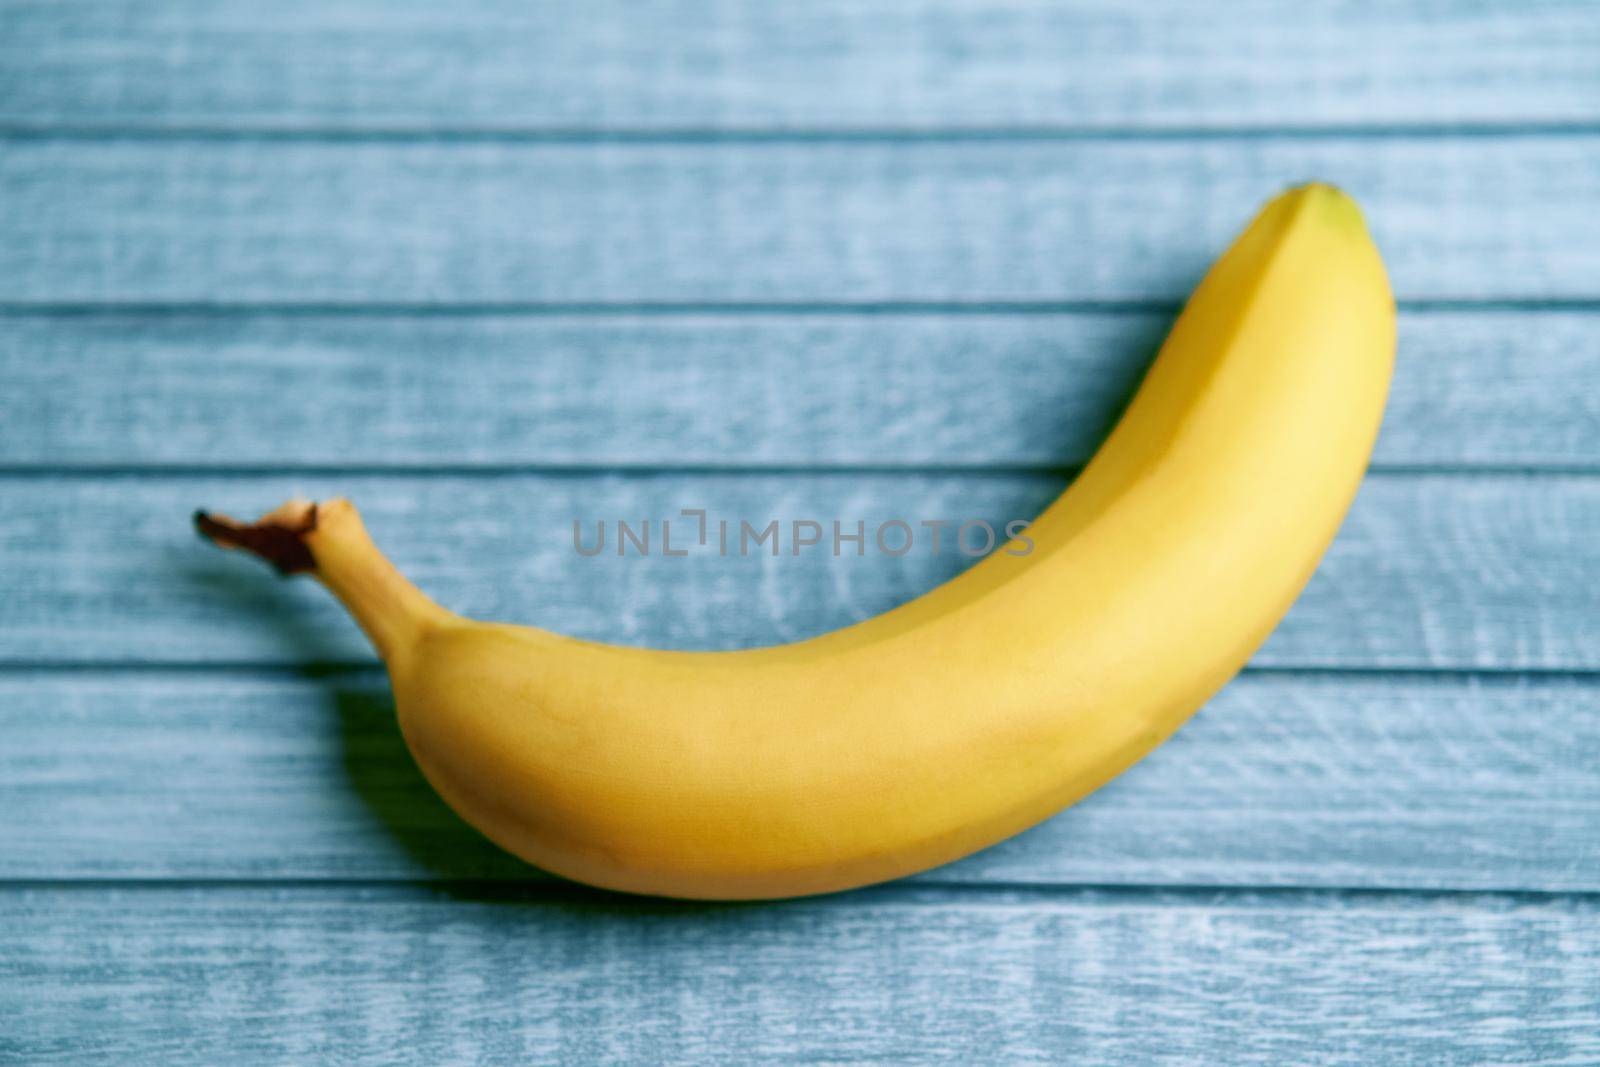 Yellow banana on a wooden background by snep_photo